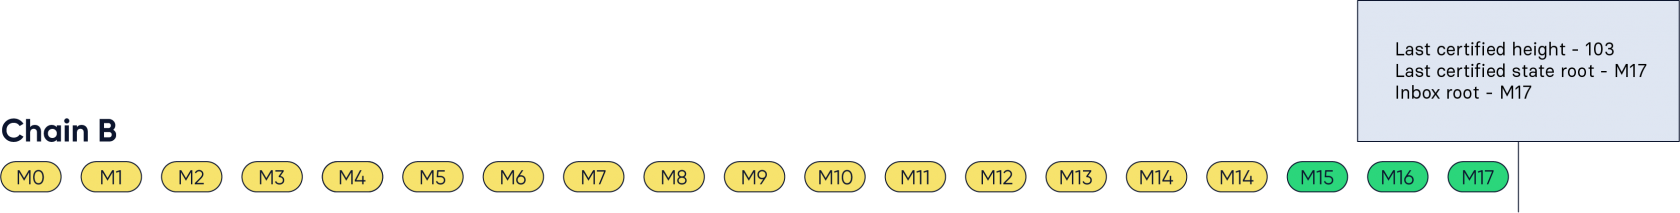 Figure 10: The CCMs M15 to M17 are now included in the inbox.